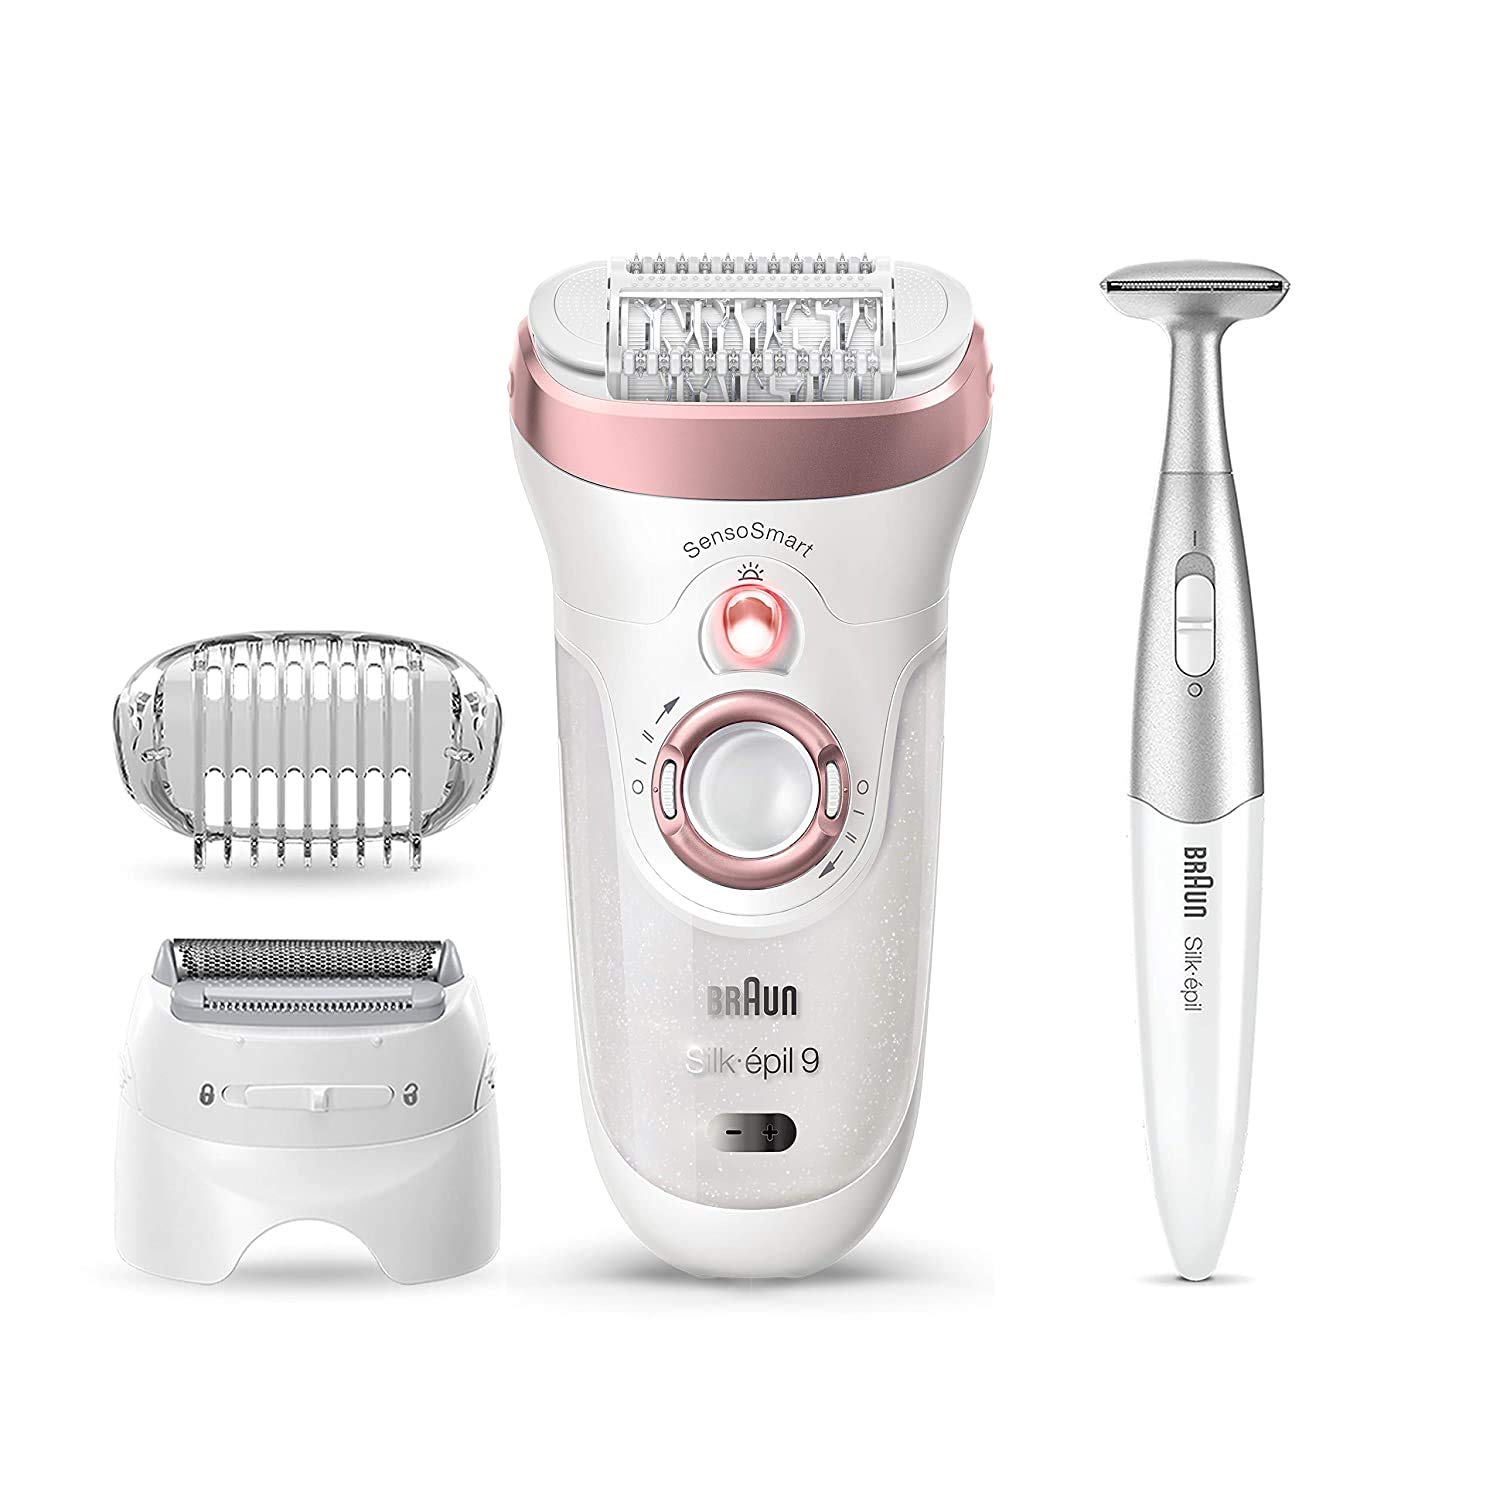 Braun Silk-épil 9 9-890, Facial Hair Removal for Women, Hair Removal Device, Bikini Trimmer, Womens Shaver Wet & Dry, Cordless and 7 extras